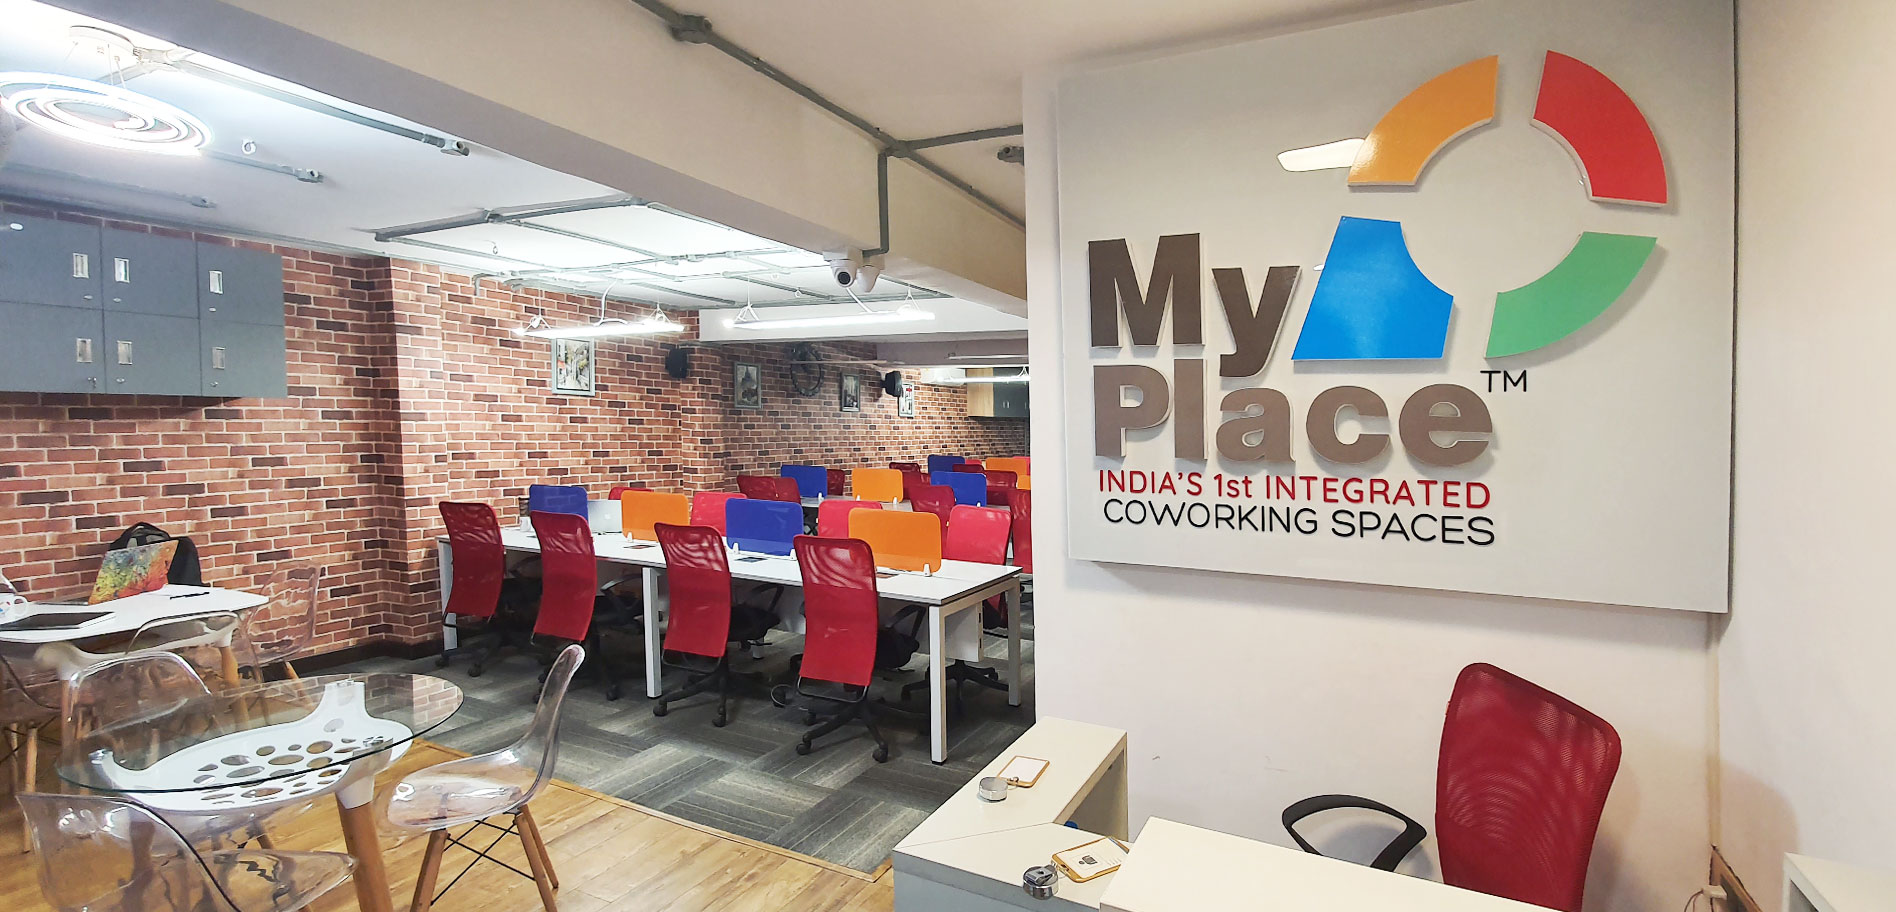 My Place Coworking™, India's 1st integrated coworking spaces. Office Space, Meeting Rooms & Virtual Offices